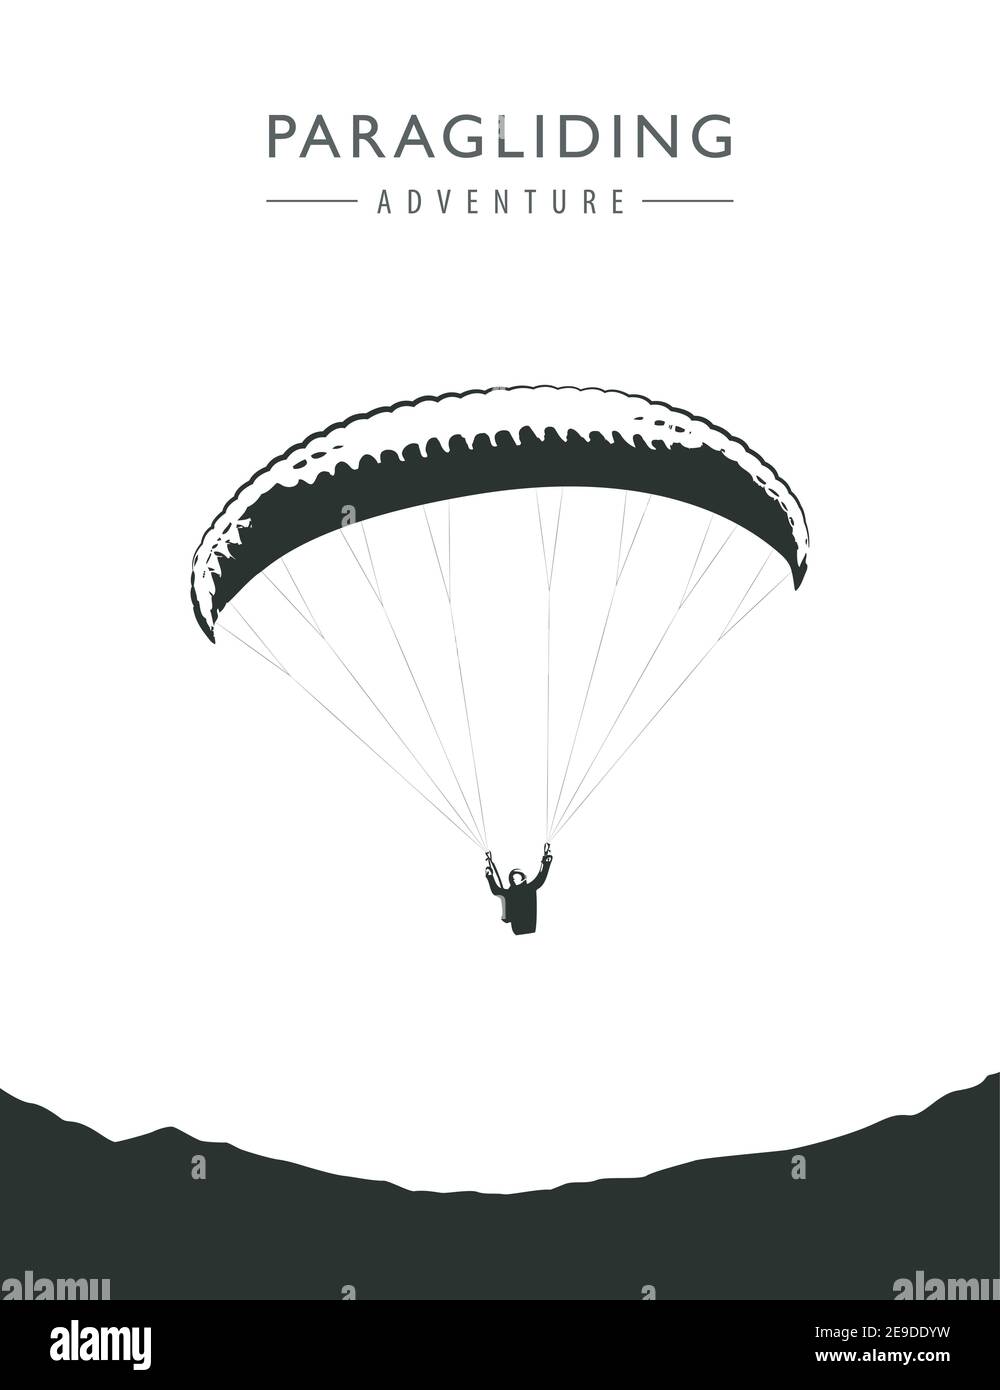 paragliding adventure paraglider silhouette isolated on white background vector illustration EPS10 Stock Vector